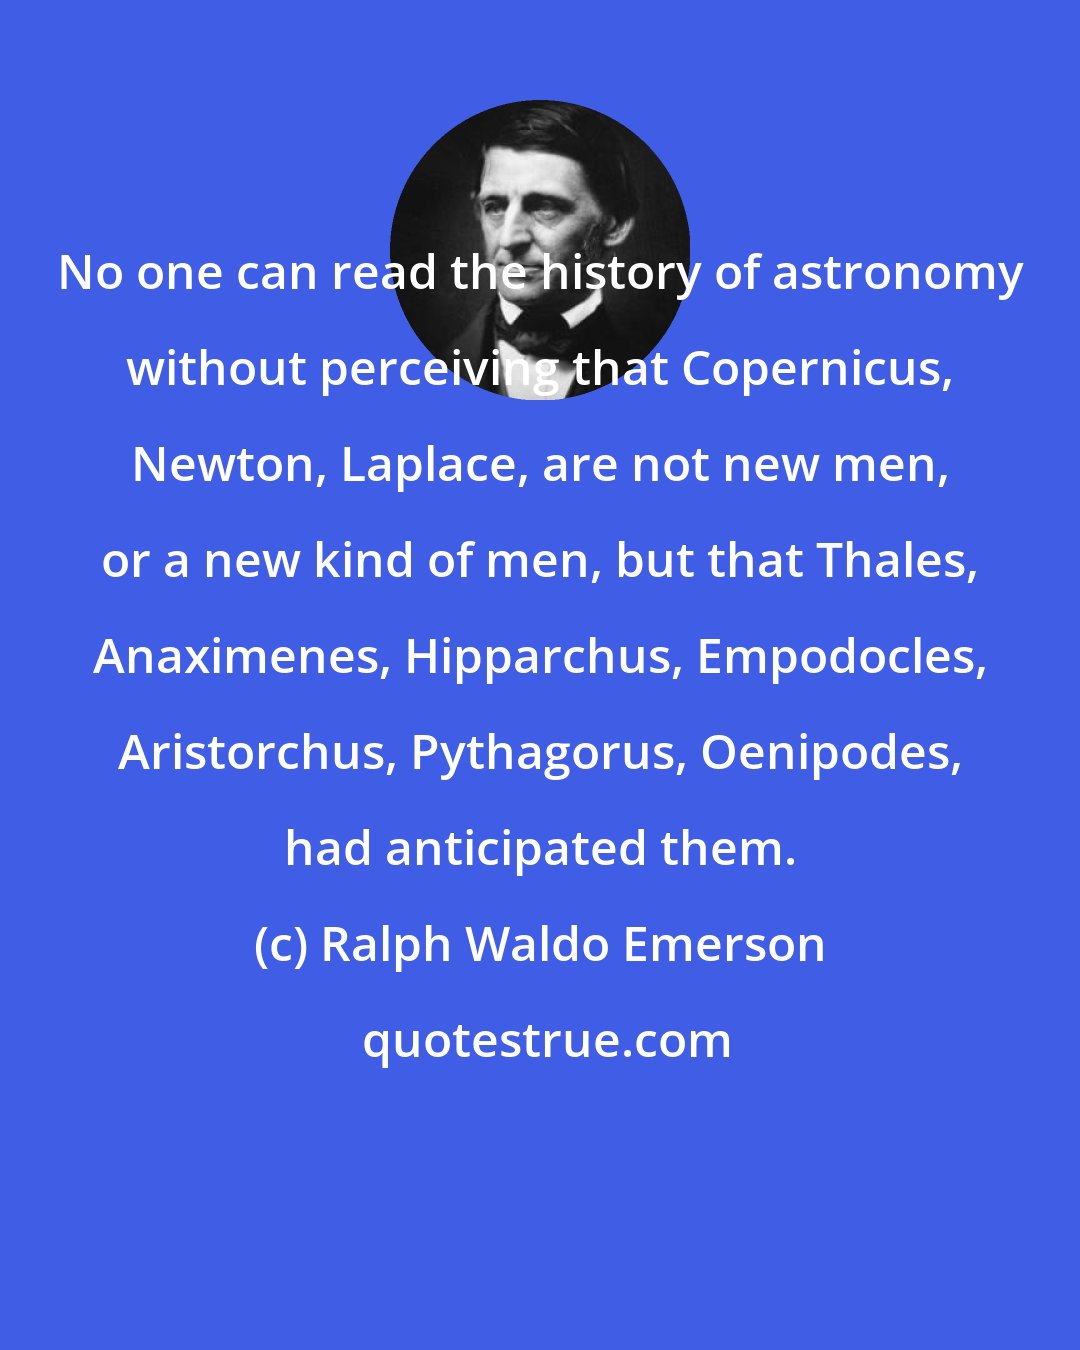 Ralph Waldo Emerson: No one can read the history of astronomy without perceiving that Copernicus, Newton, Laplace, are not new men, or a new kind of men, but that Thales, Anaximenes, Hipparchus, Empodocles, Aristorchus, Pythagorus, Oenipodes, had anticipated them.